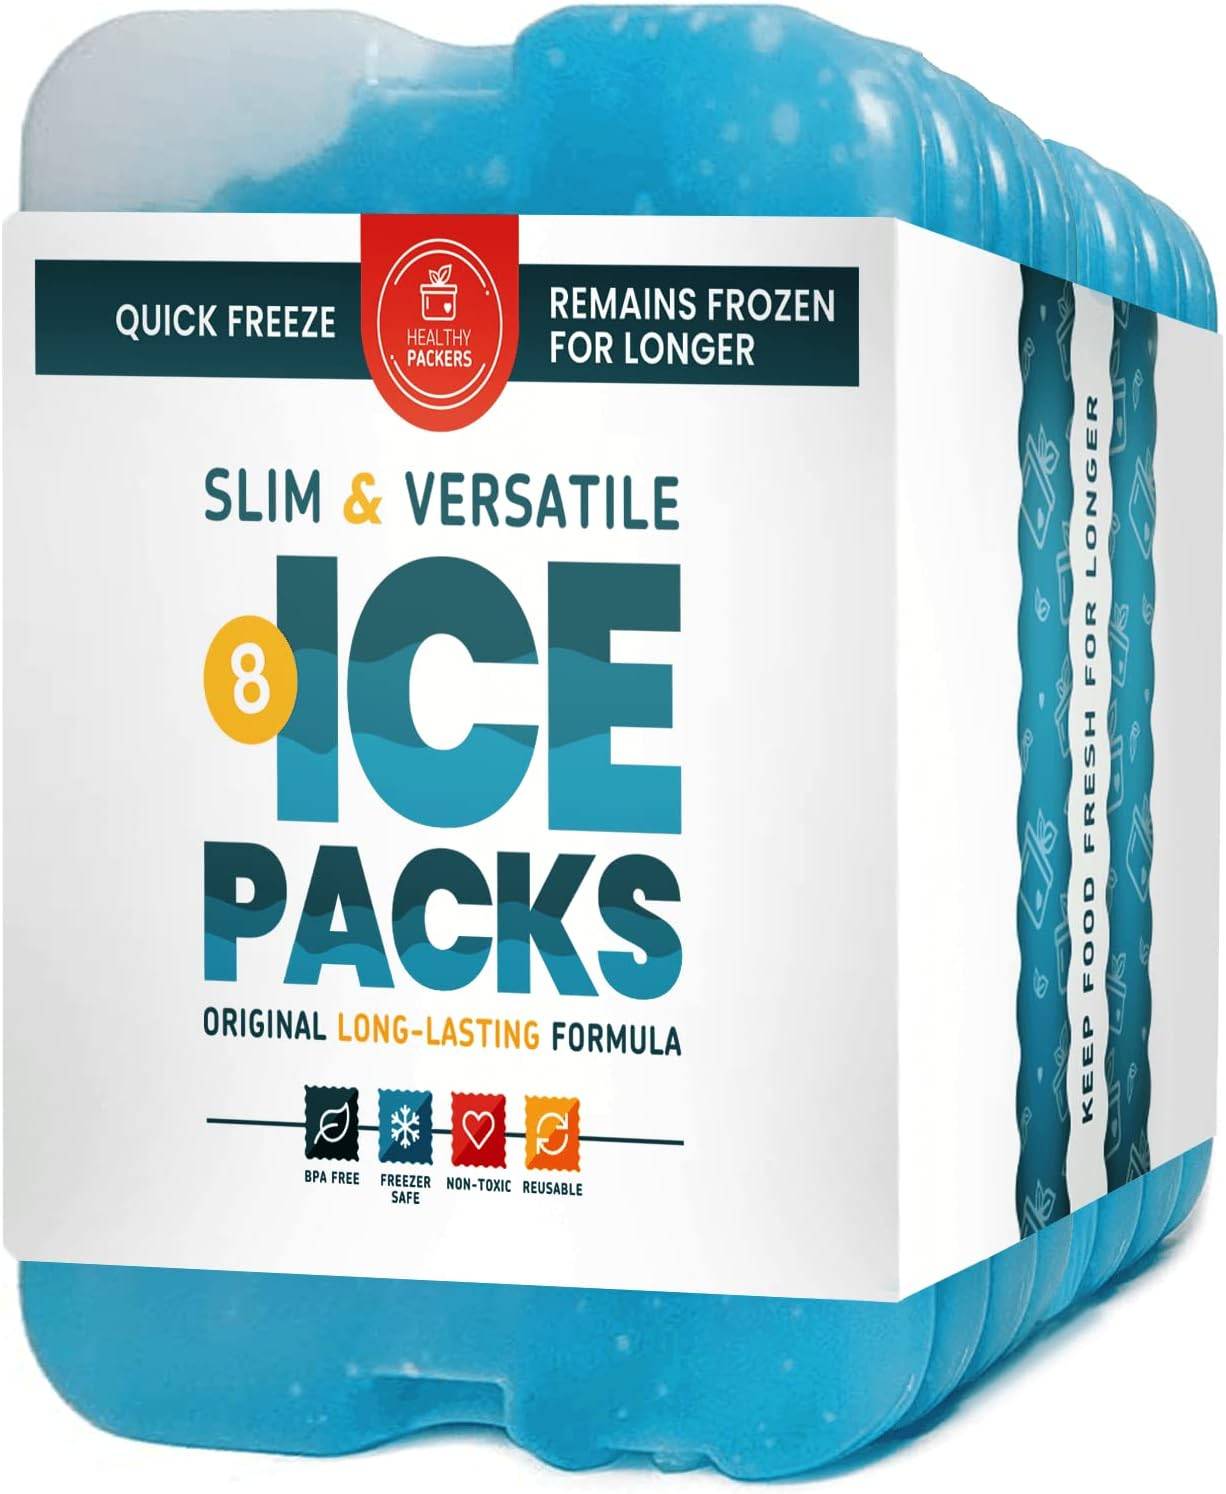 Healthy Packers Ice Packs for Lunch Bags - Original Cool Pack | Slim & Long-Lasting Reusable Ice Pack for Lunch Box, Lunch Bag and Cooler | Freezer Packs for Coolers (Set of 8) - Hatke